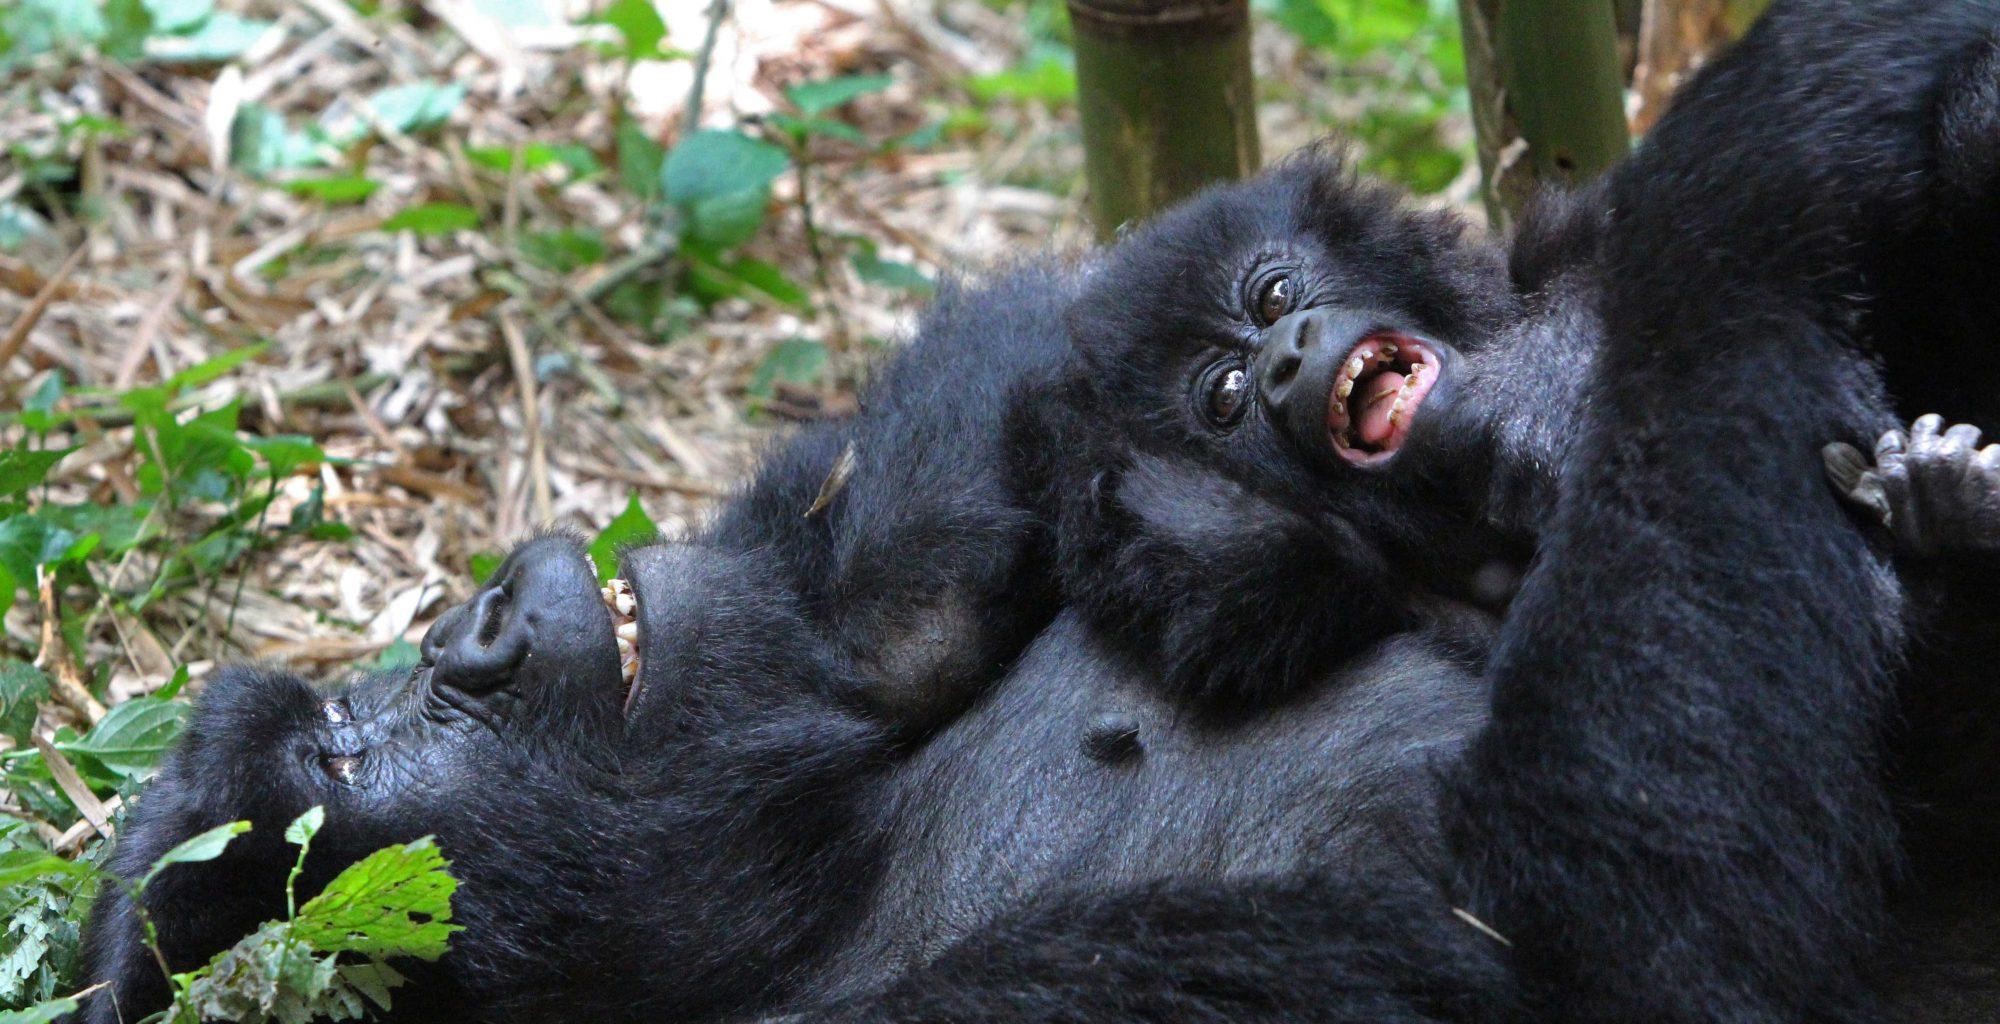 A Mother Mountain Gorilla having a good time with her baby